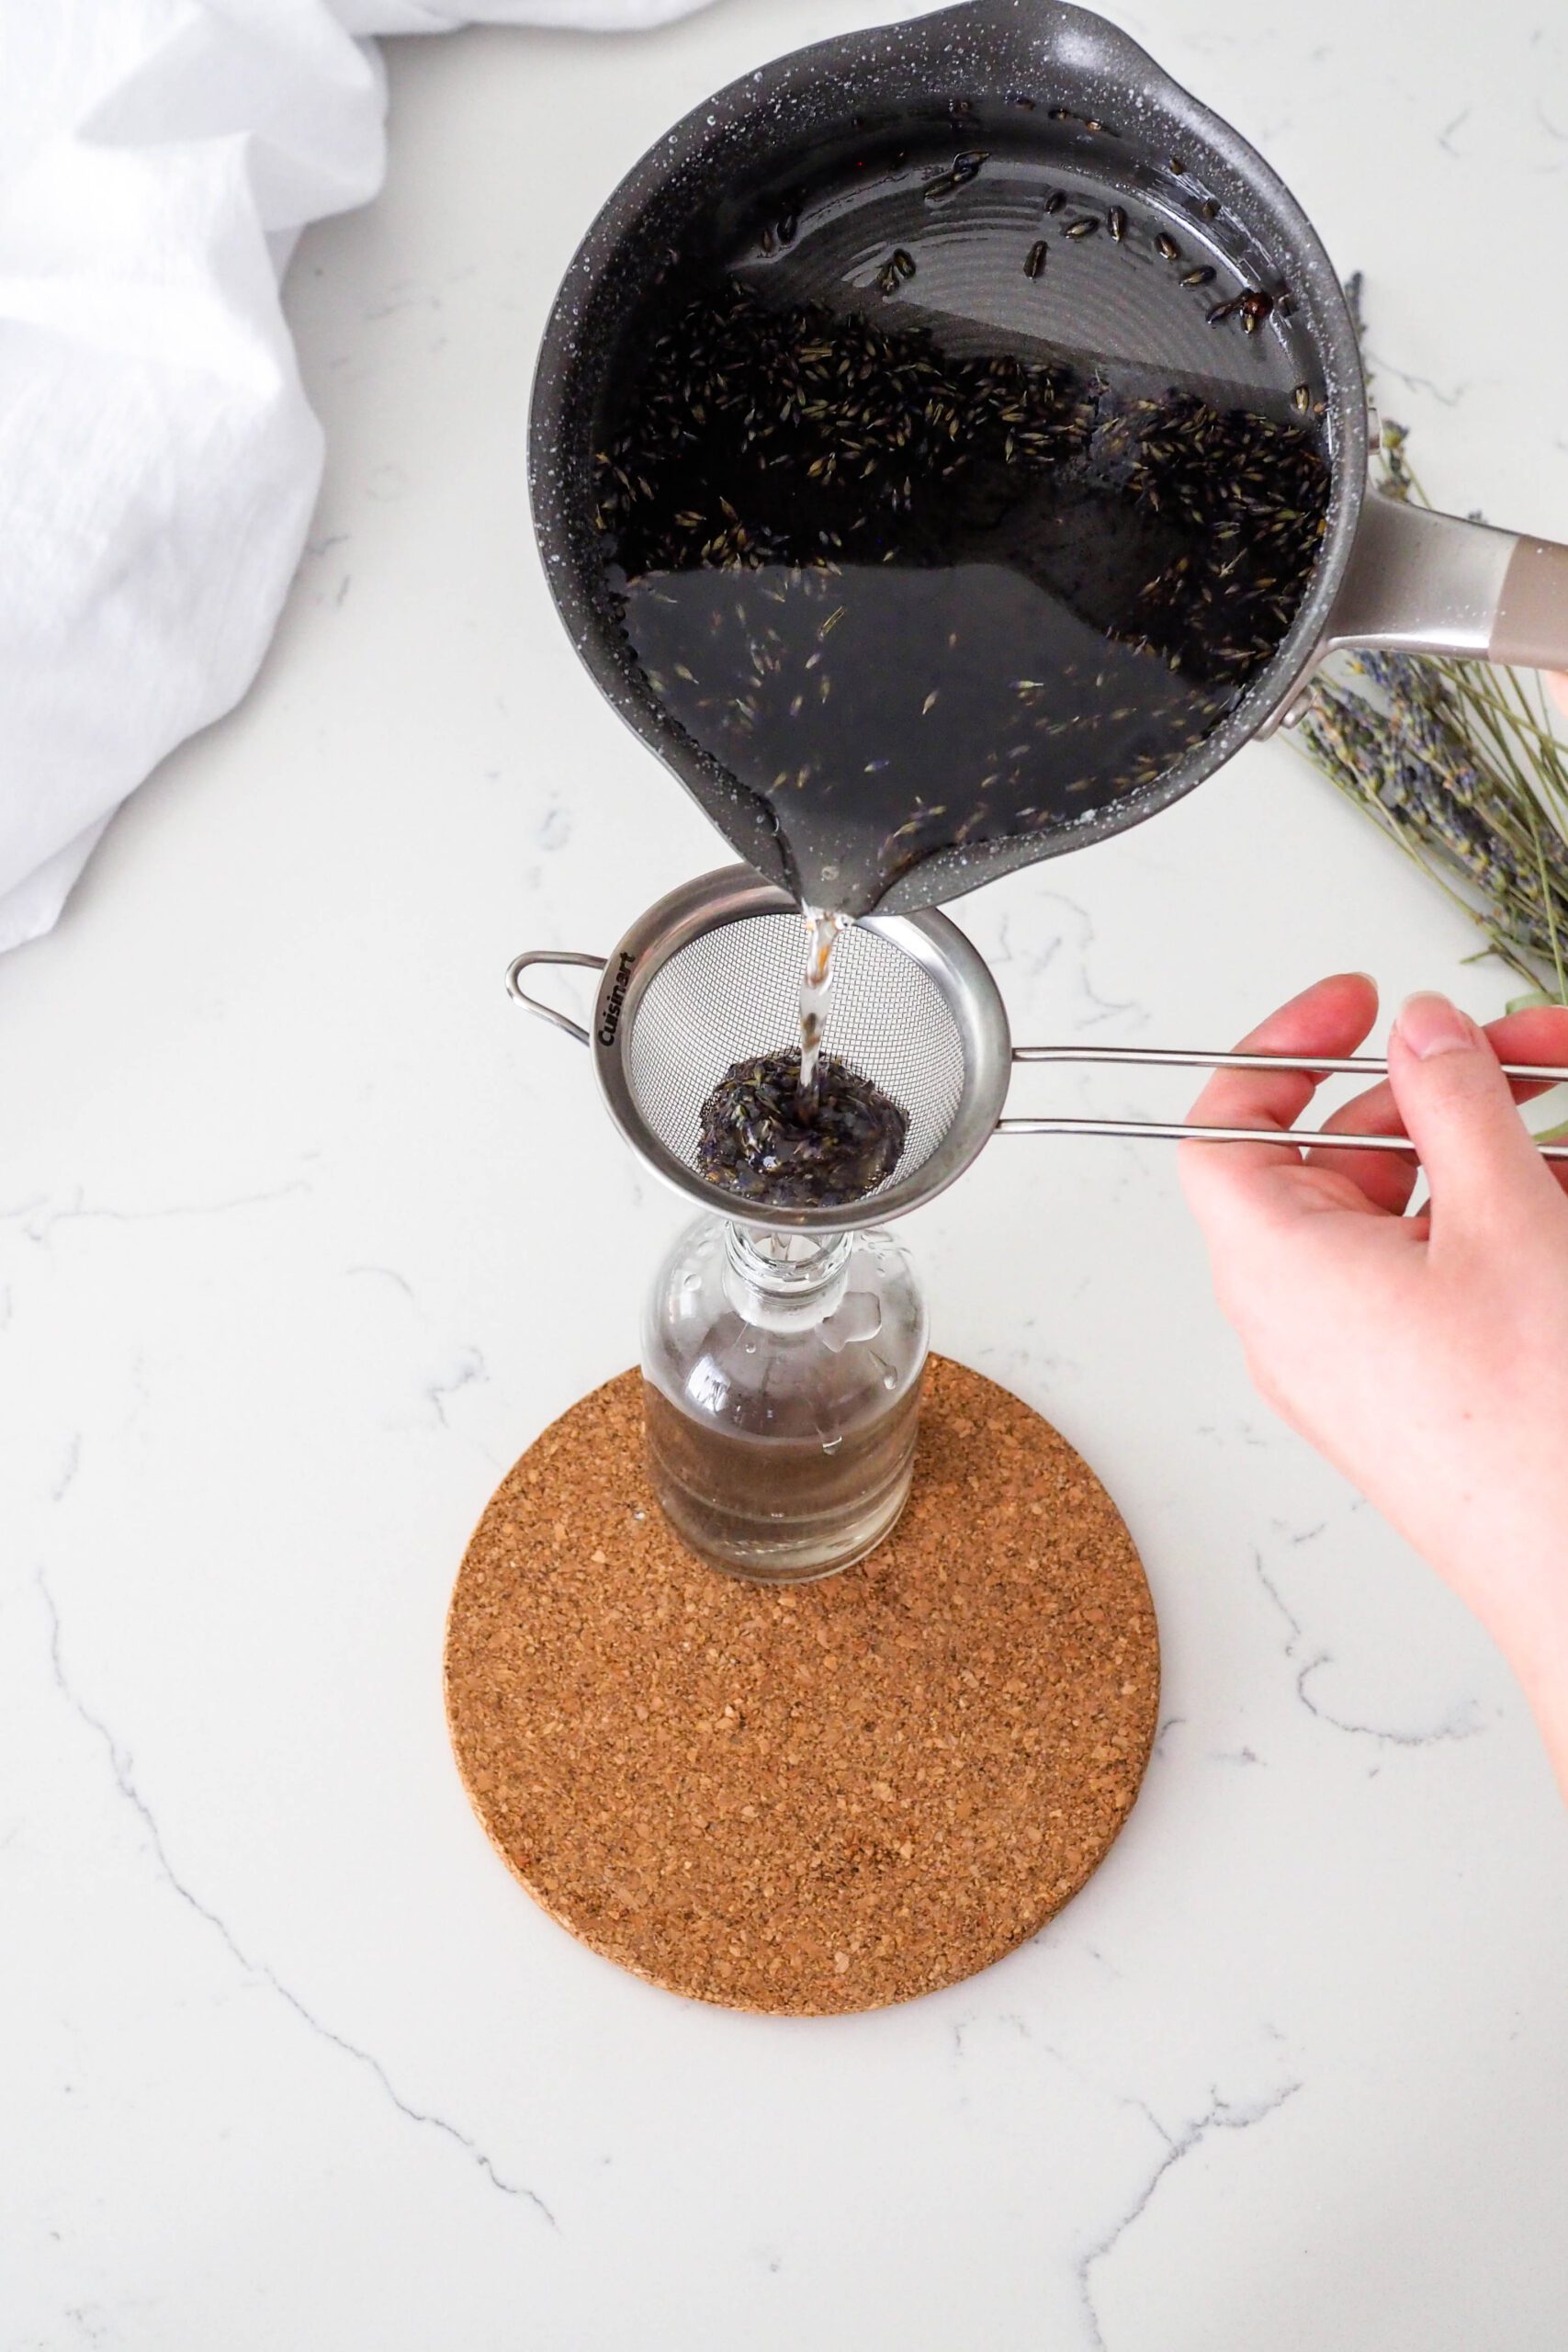 Lavender syrup is poured through a fine mesh strainer into a narrow-necked bottle.